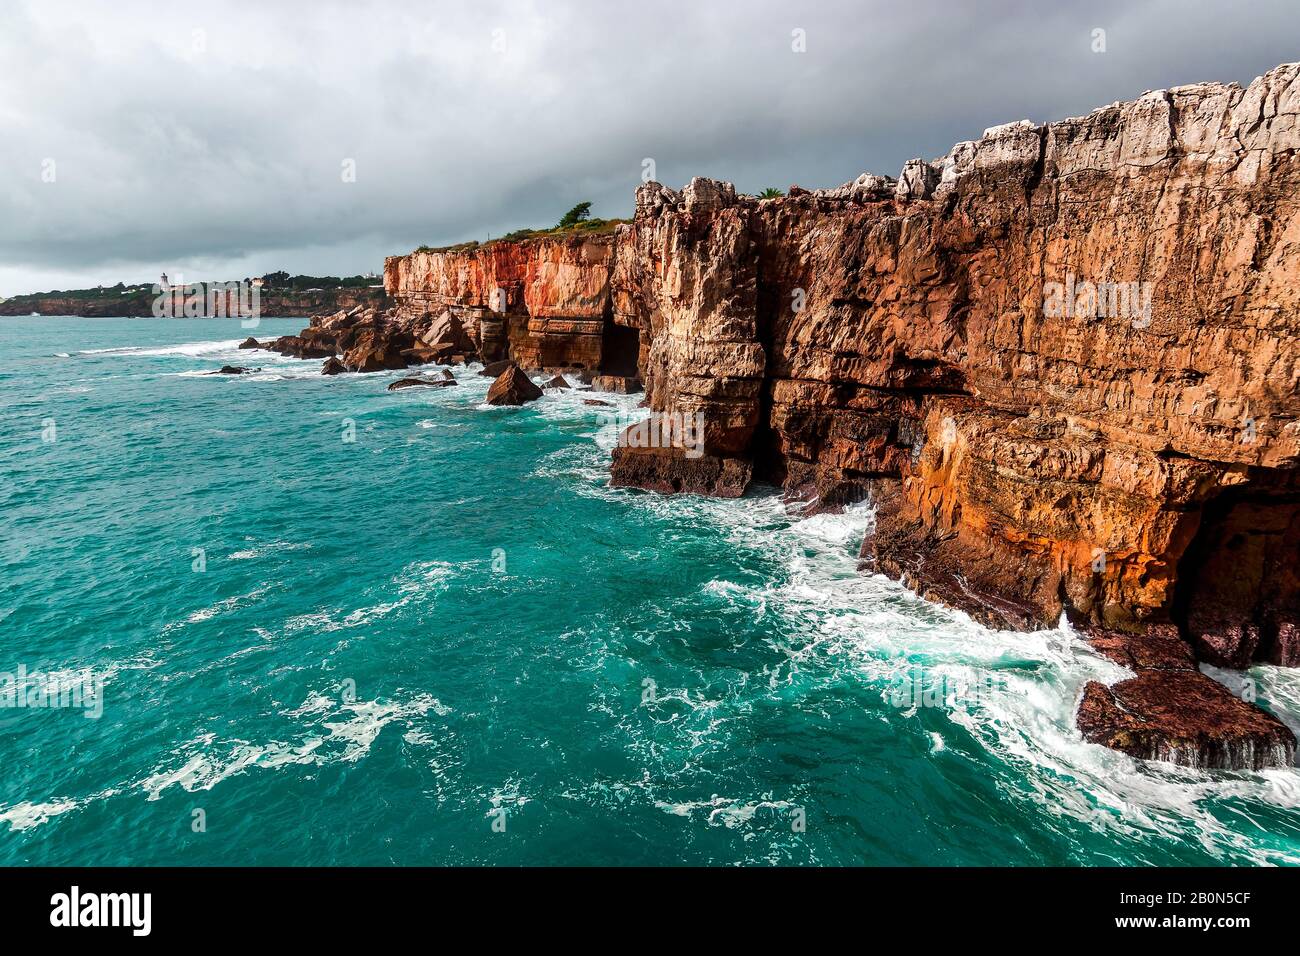 Rocks and ocean before the storm. Amazing view at Boca do Inferno, Hell's Mouth – Cascais, Portugal Stock Photo